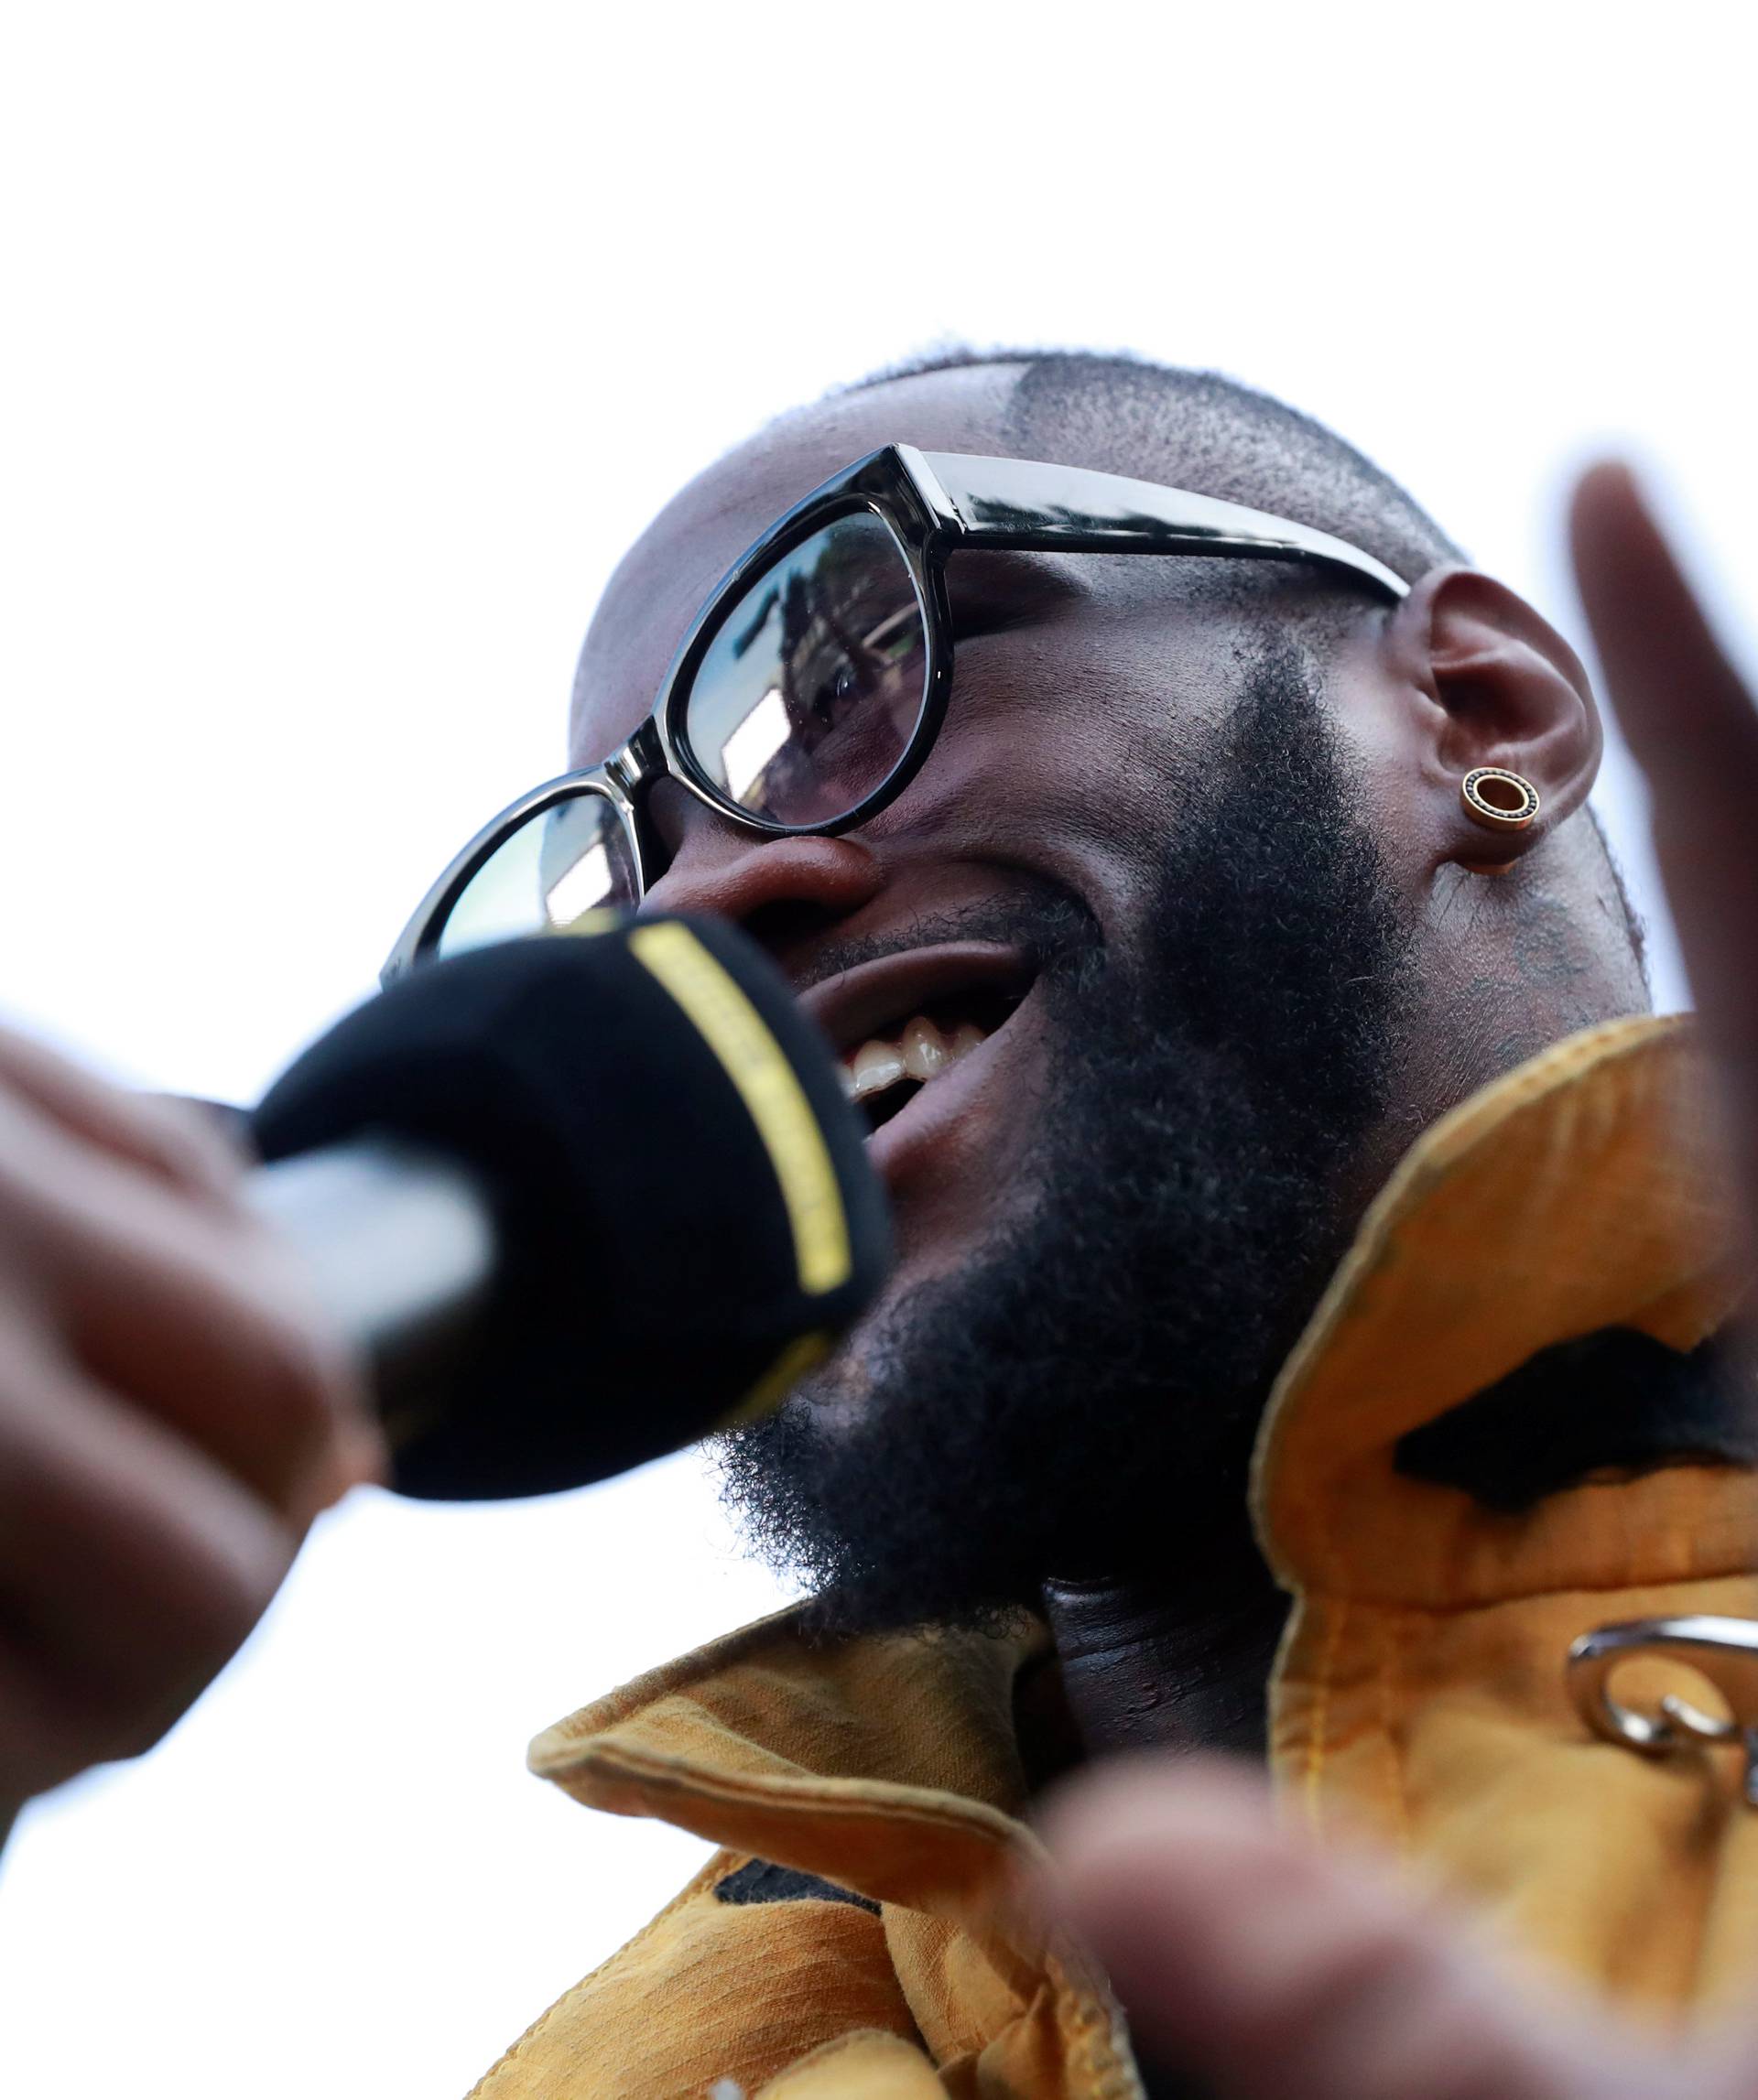 Deontay Wilder presents tickets to LA firefighters ahead of his WBC heavyweight title fight with Tyson Fury